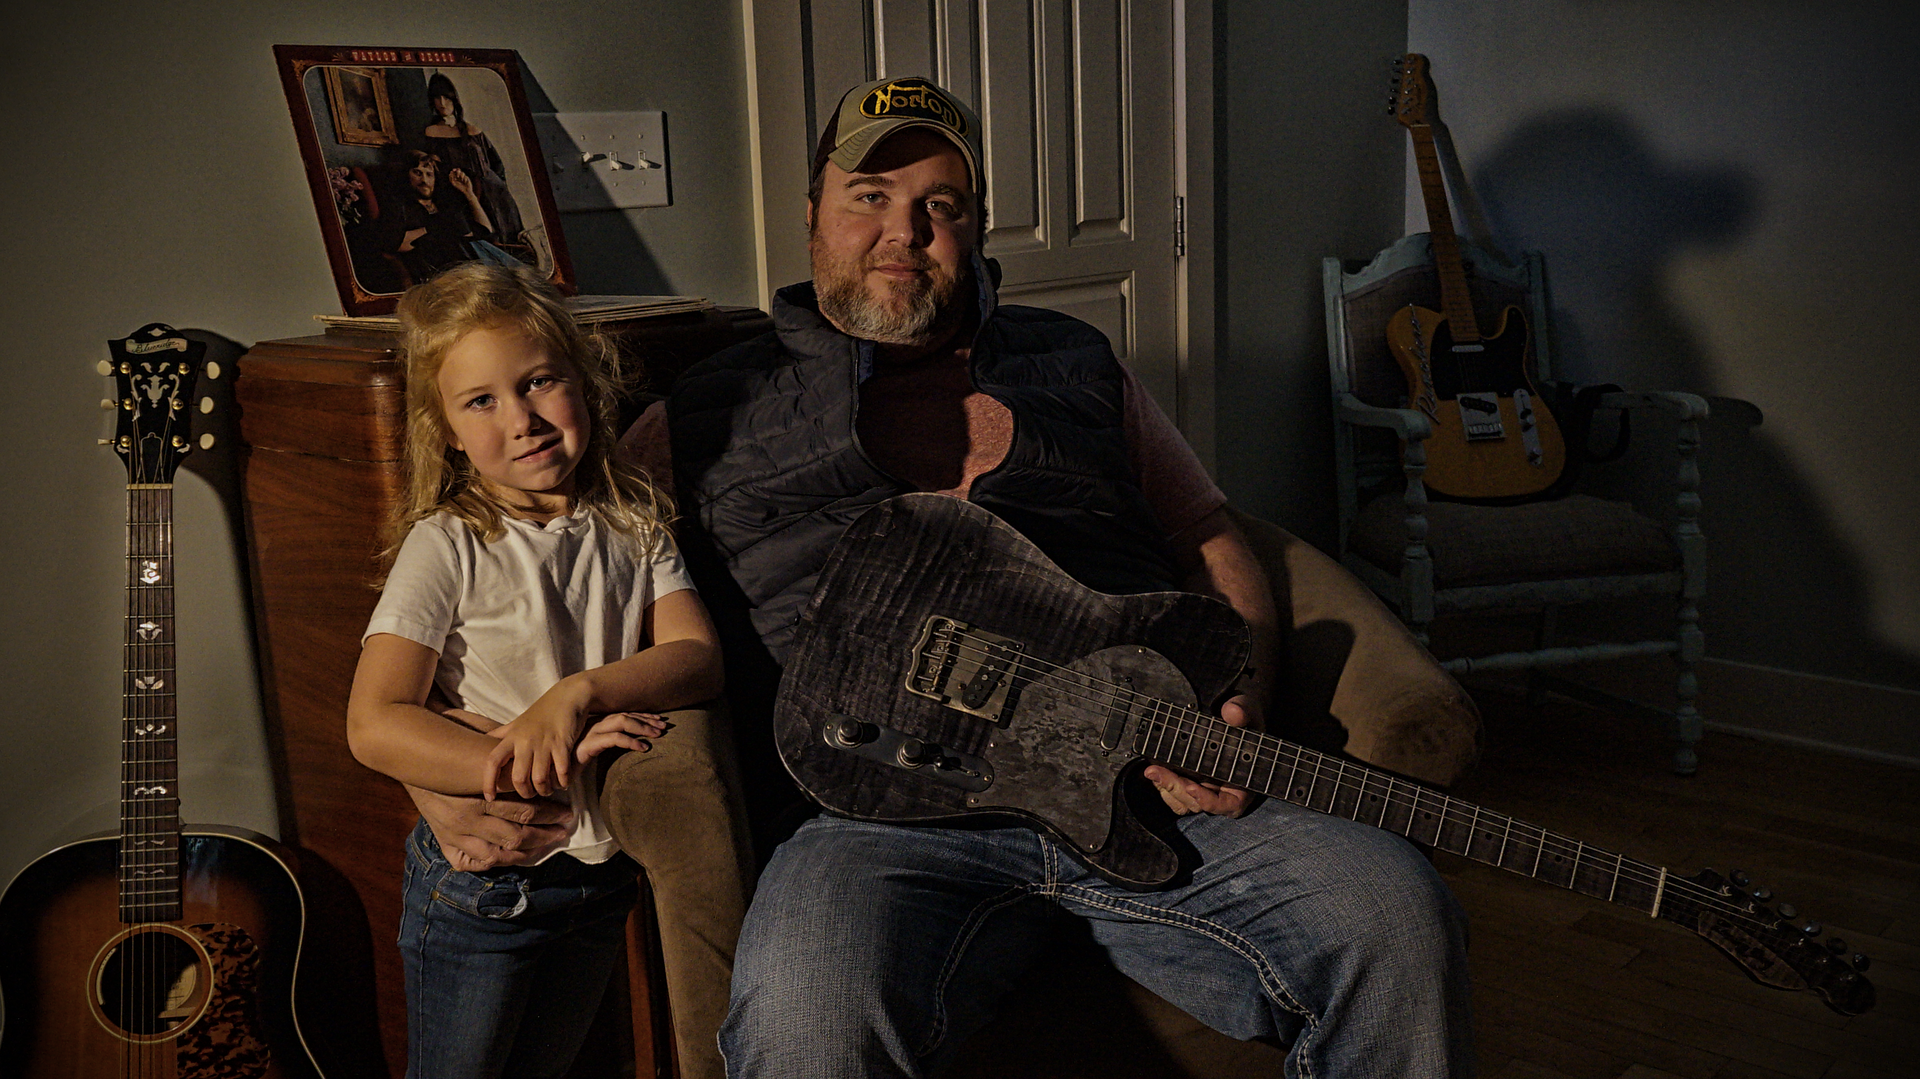 Anthony%20Brooklynn%20with%20Guitar%20Oct%2030%202017_zpsqnnq9cpy.png